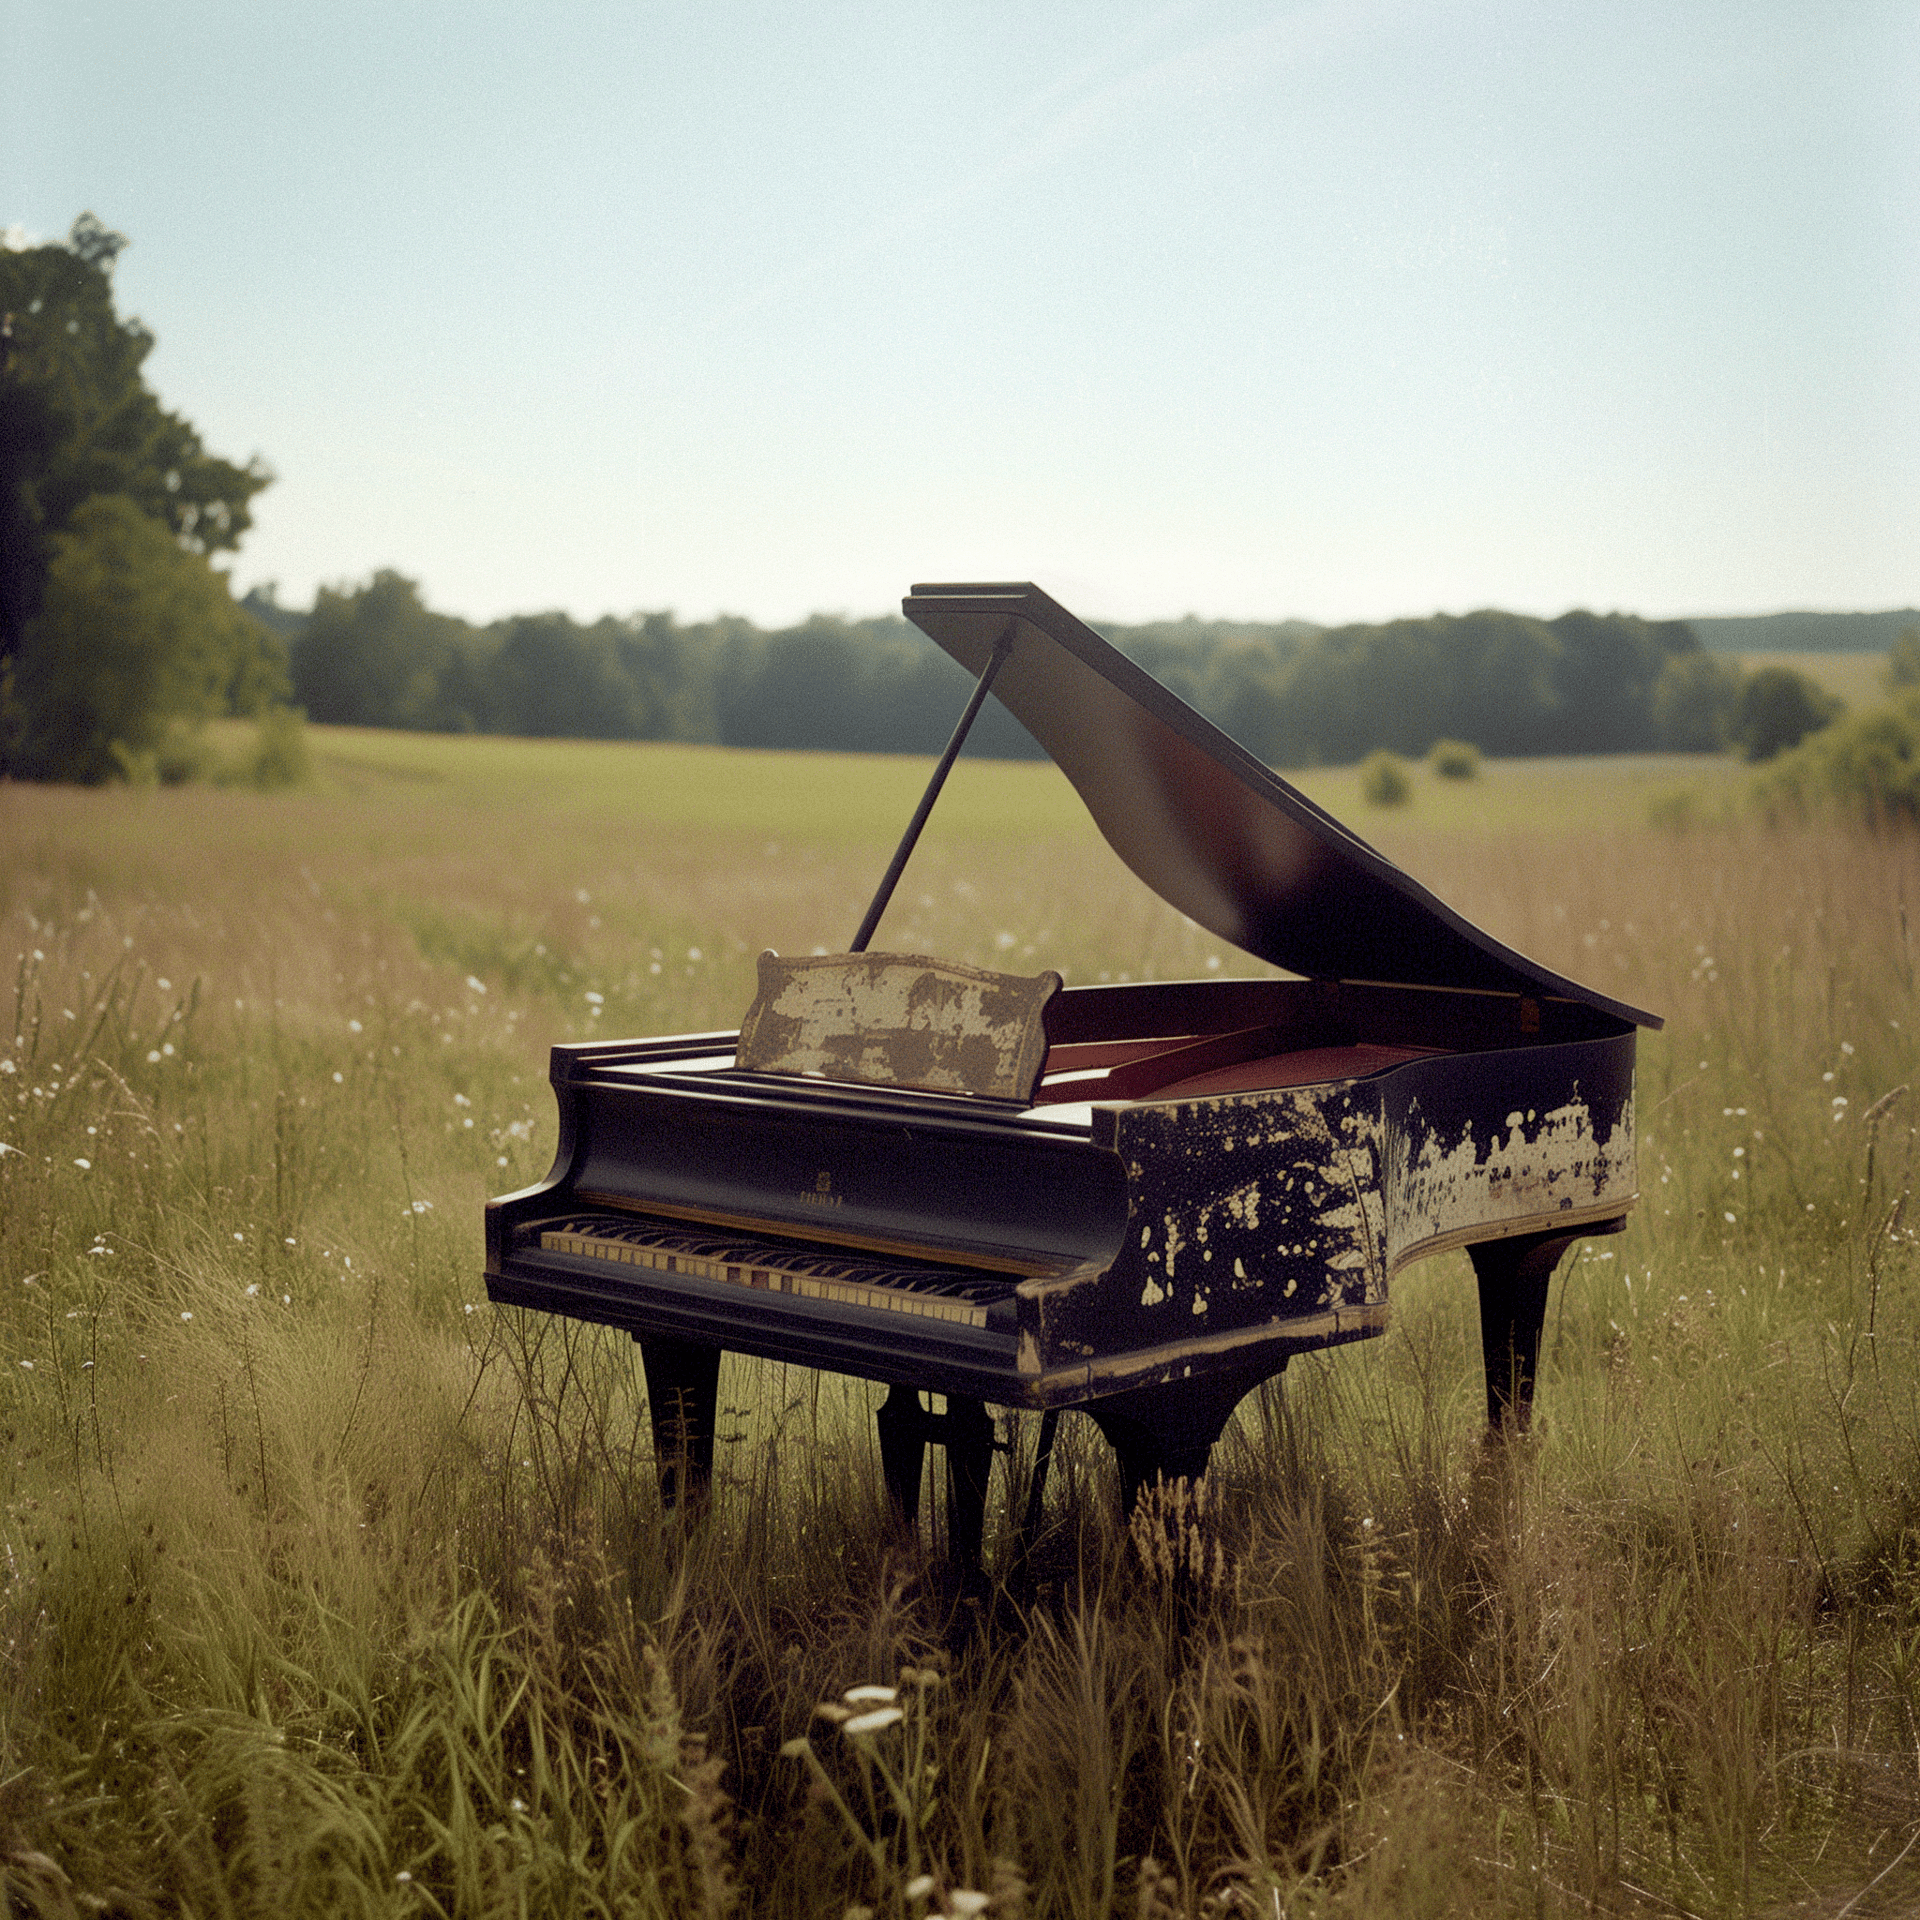 Abandoned piano in the field